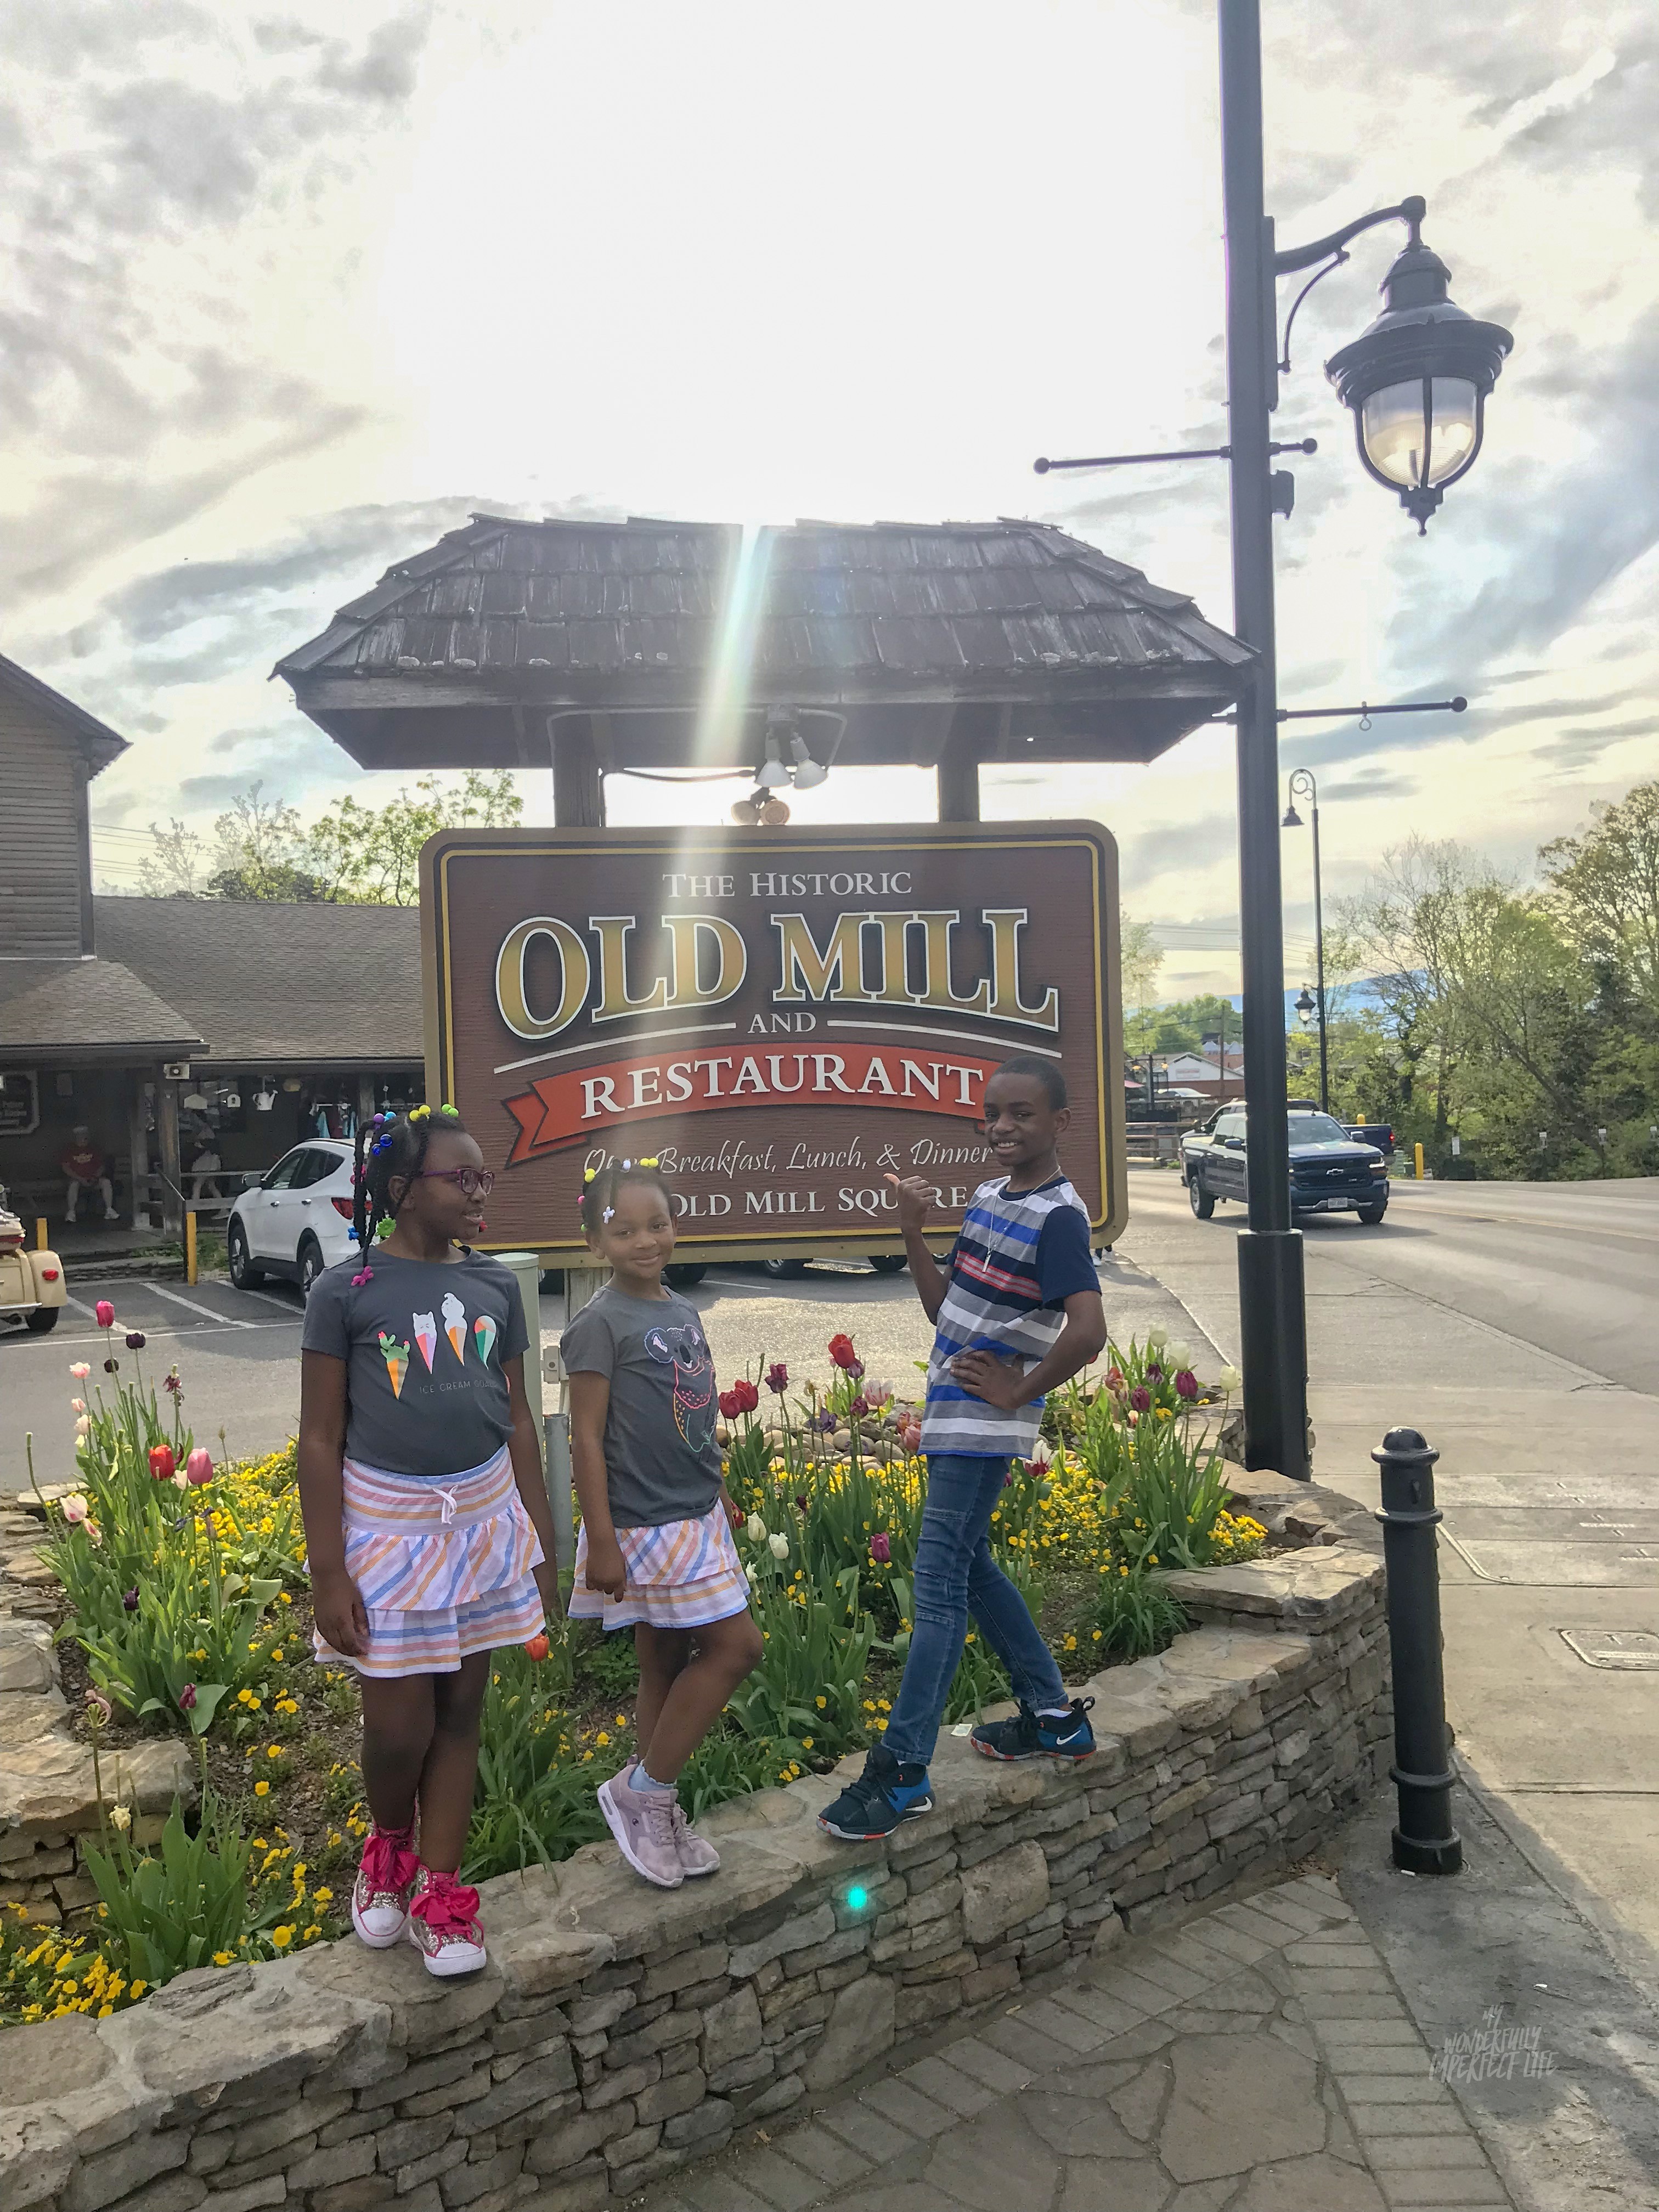 My Pigeon Forge Fun-Filled Family Vacation